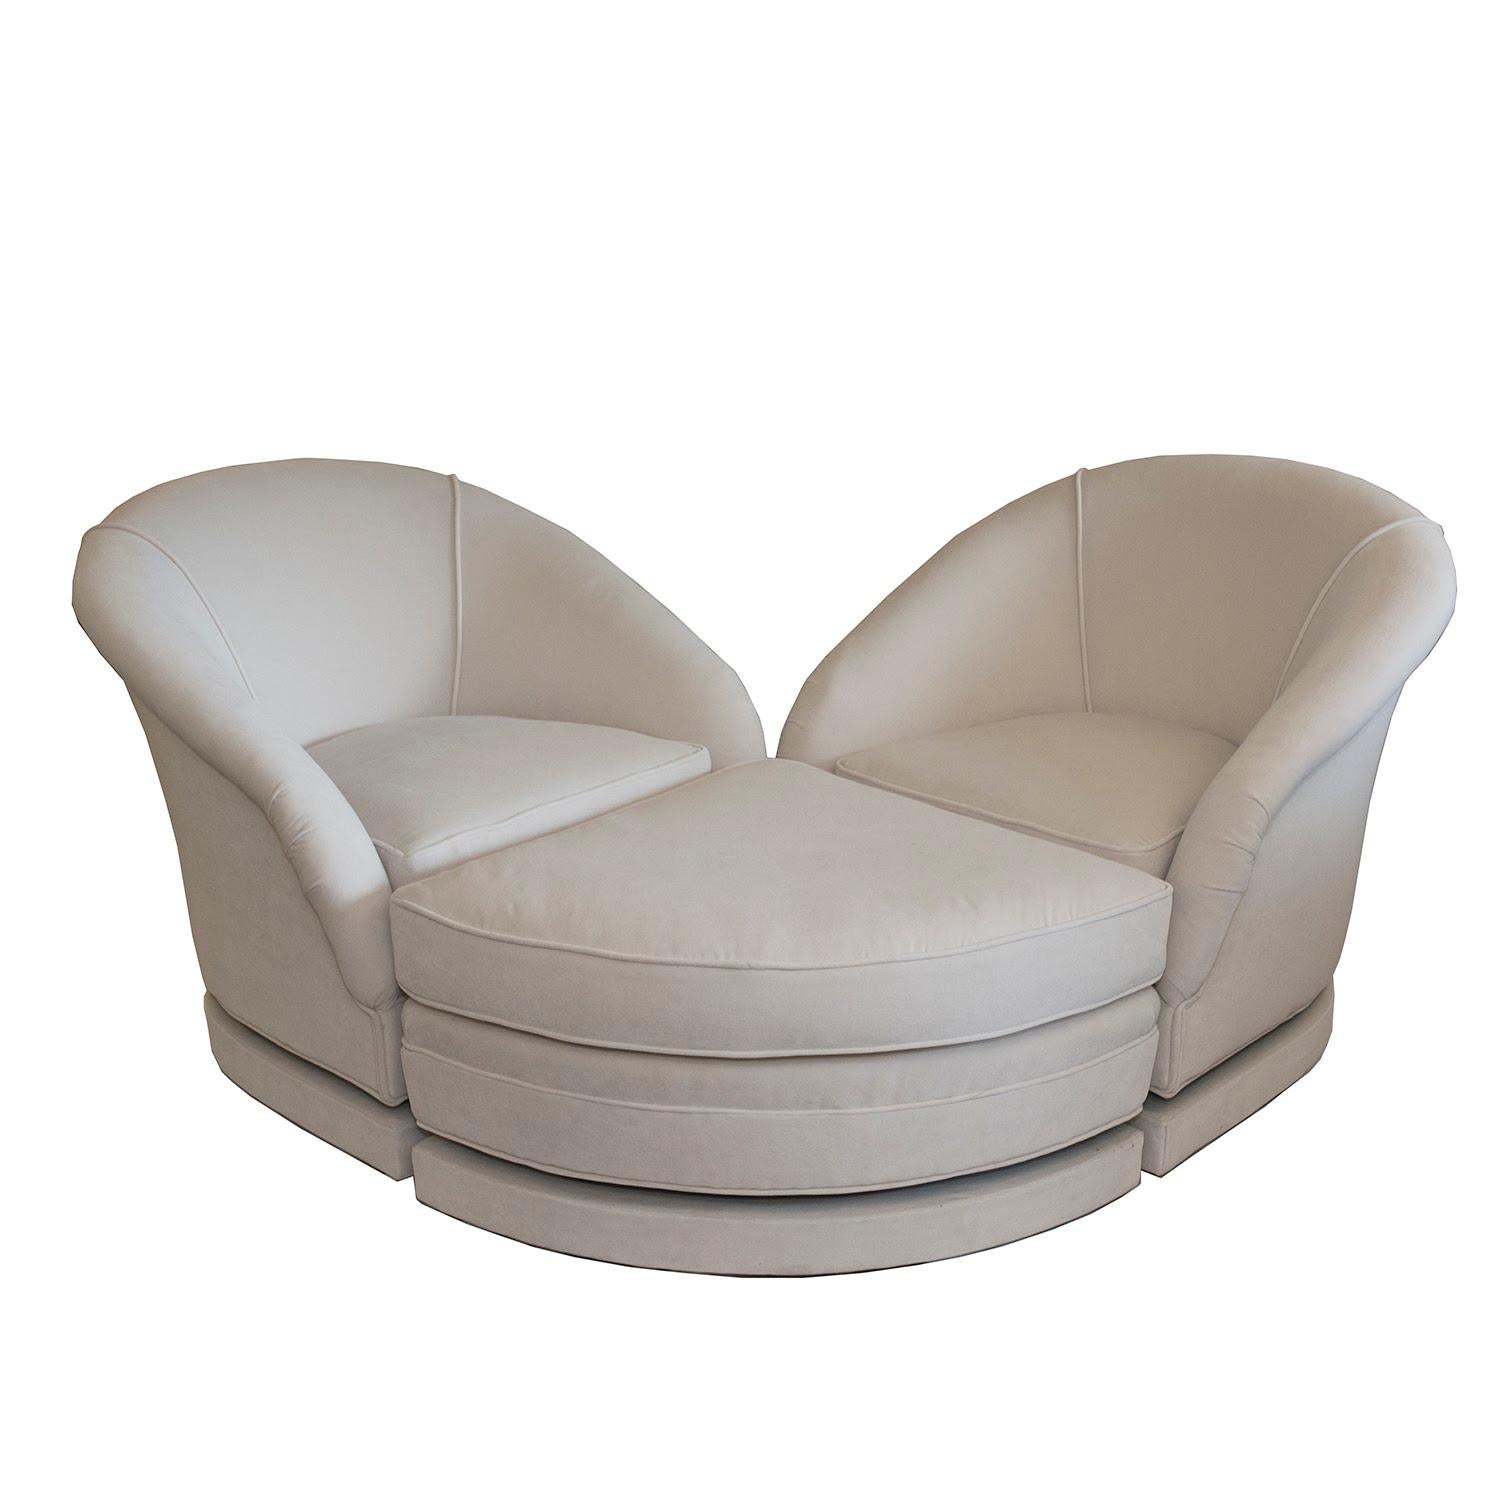 This unique set of two swivel chairs and ottoman was restored and reupholstered in our Connecticut studio, a most unusual design, both feminine and functional done in a luxurious ivory velvet, The curvilineal design enables a most comfortable